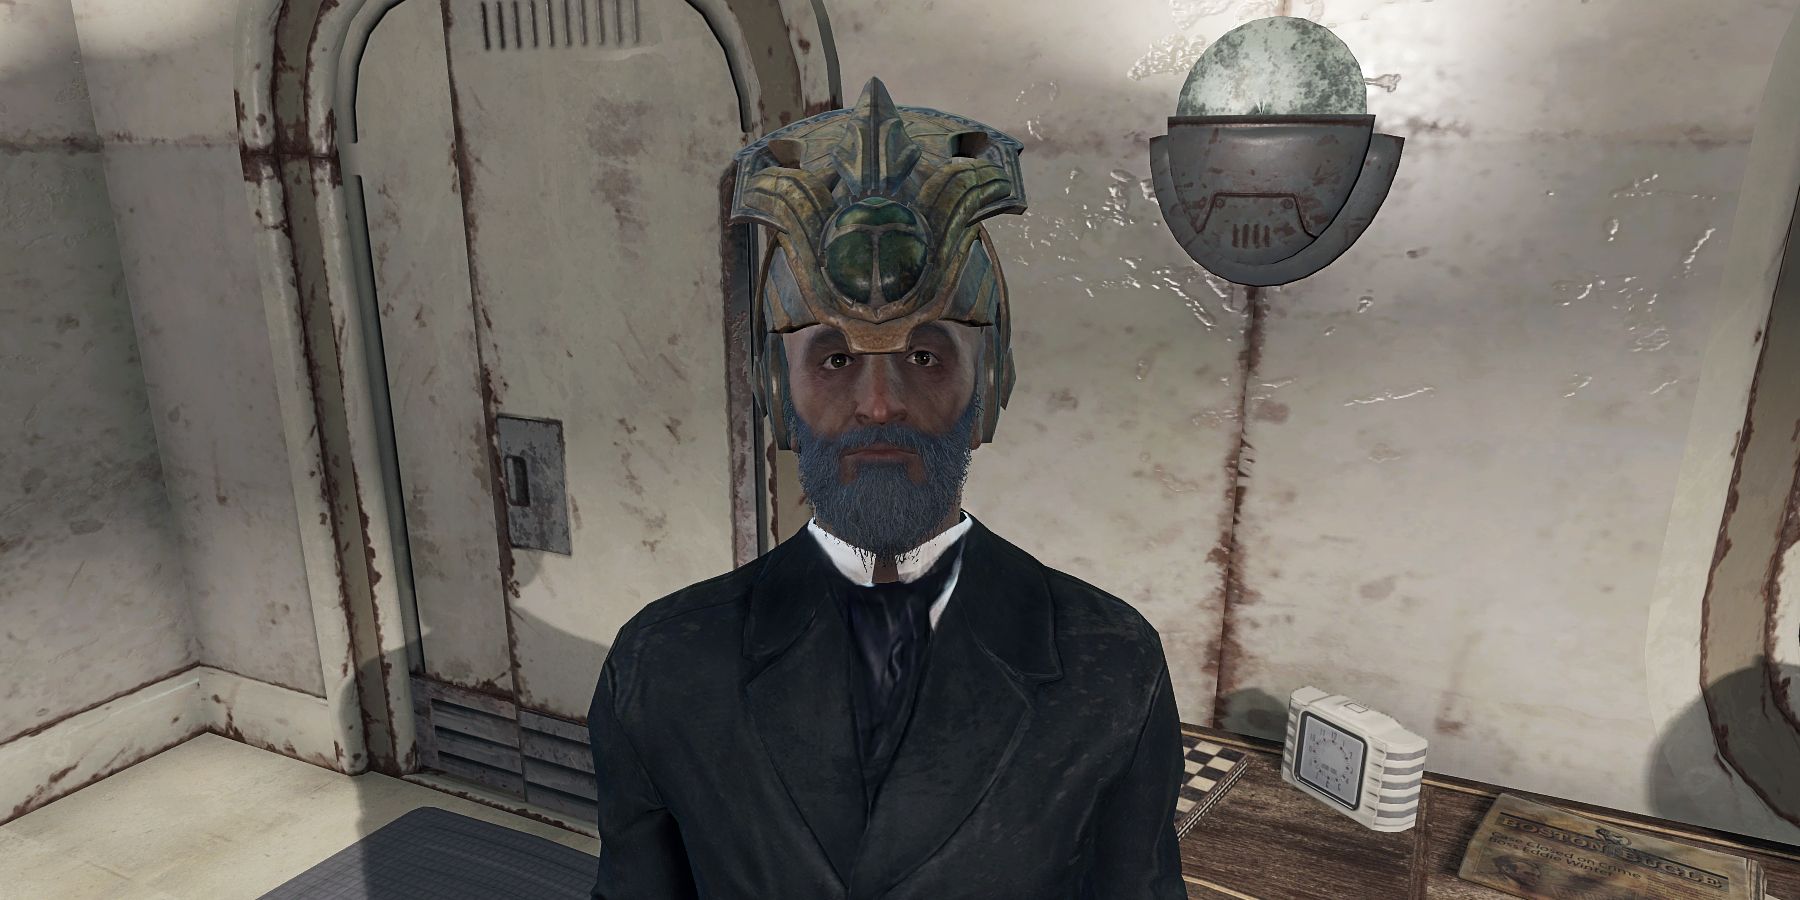 fallout 4 lorenzo cabot with the strange artifact staring into your soul